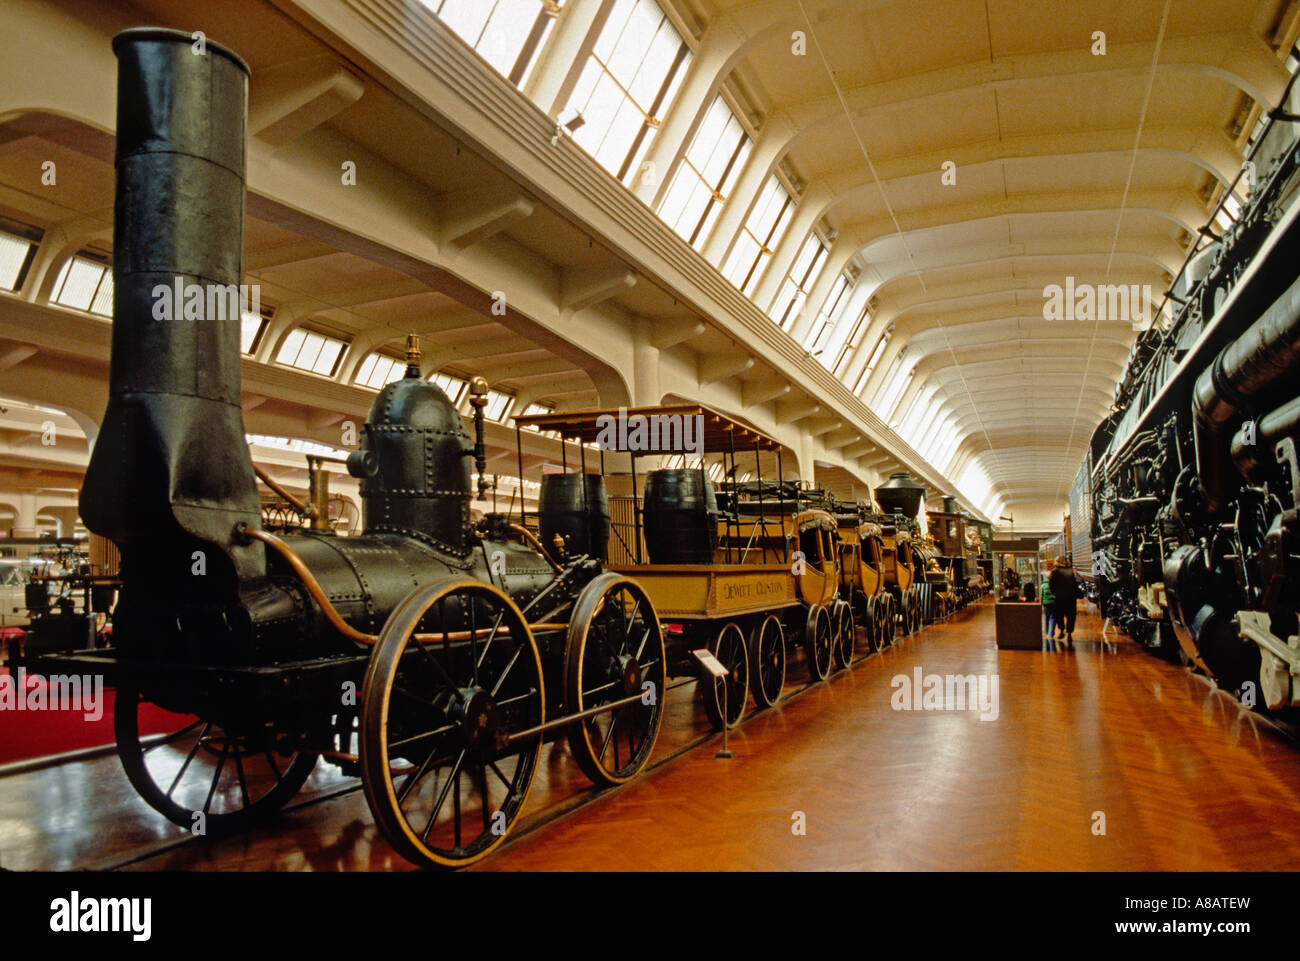 OLD RAILROAD STEAM ENGINE and TRAIN in the HENRY FORD MUSEUM DEARBORN MICHIGAN Stock Photo